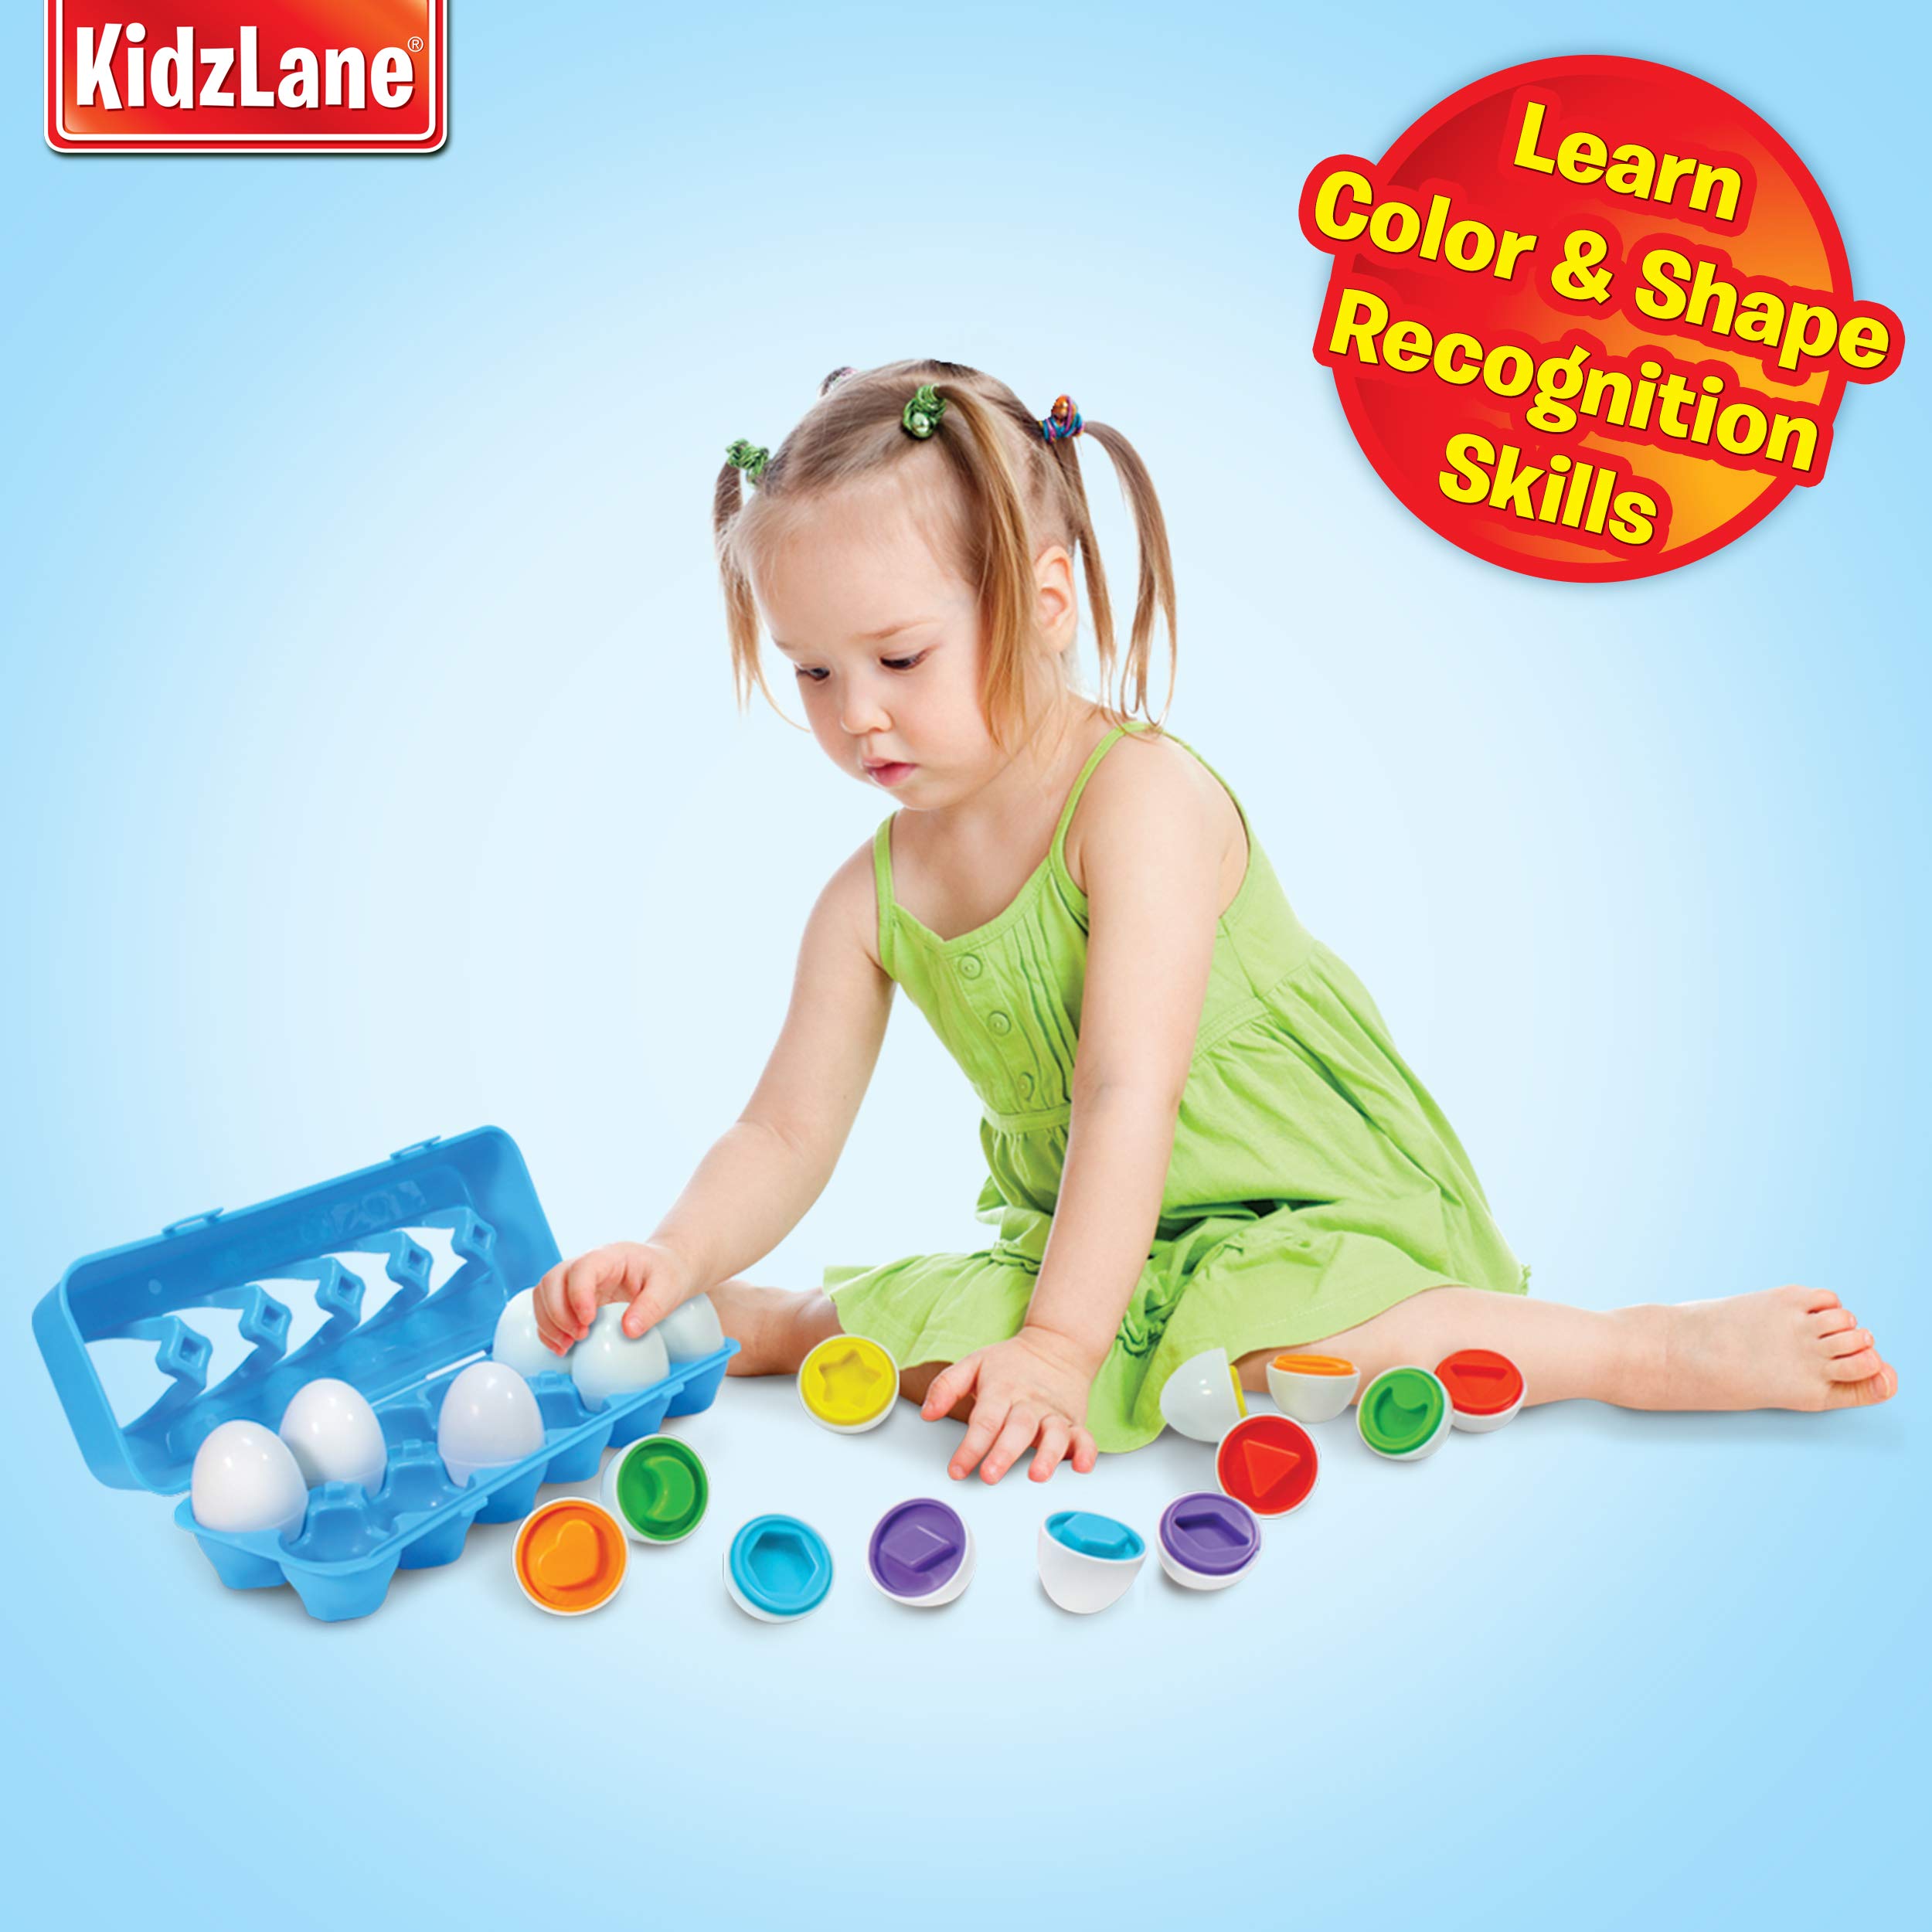 "Kidzlane Sorting & Matching Educational Egg Toy – Teach Colors, Shapes & Fine Motor Skills - 12 Sturdy Eggs in Plastic Carton – 100% Toddler & Child Safe 18M+" - image 5 of 6